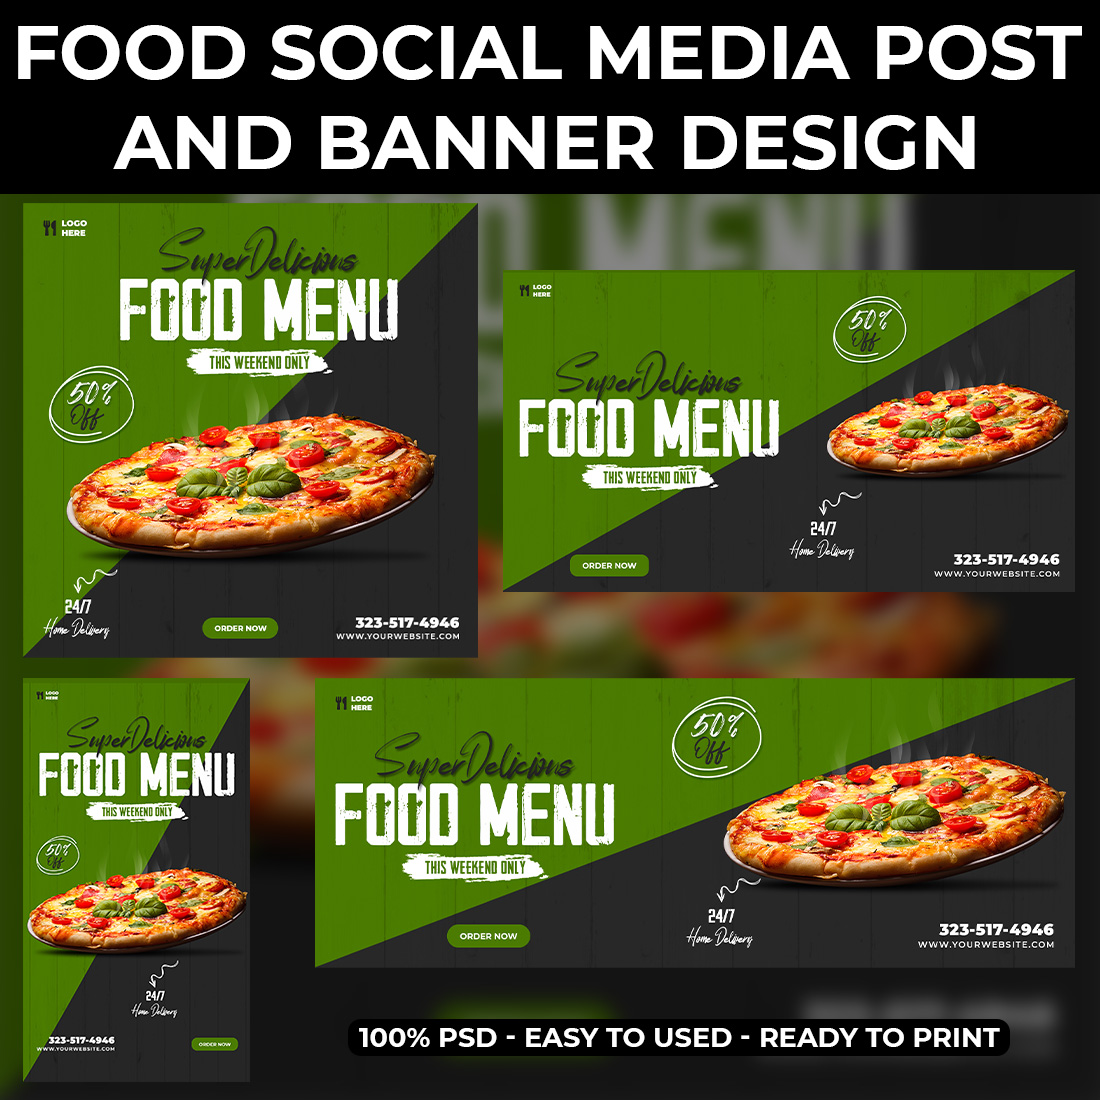 Food Social Media Post And Banner Design Template cover image.